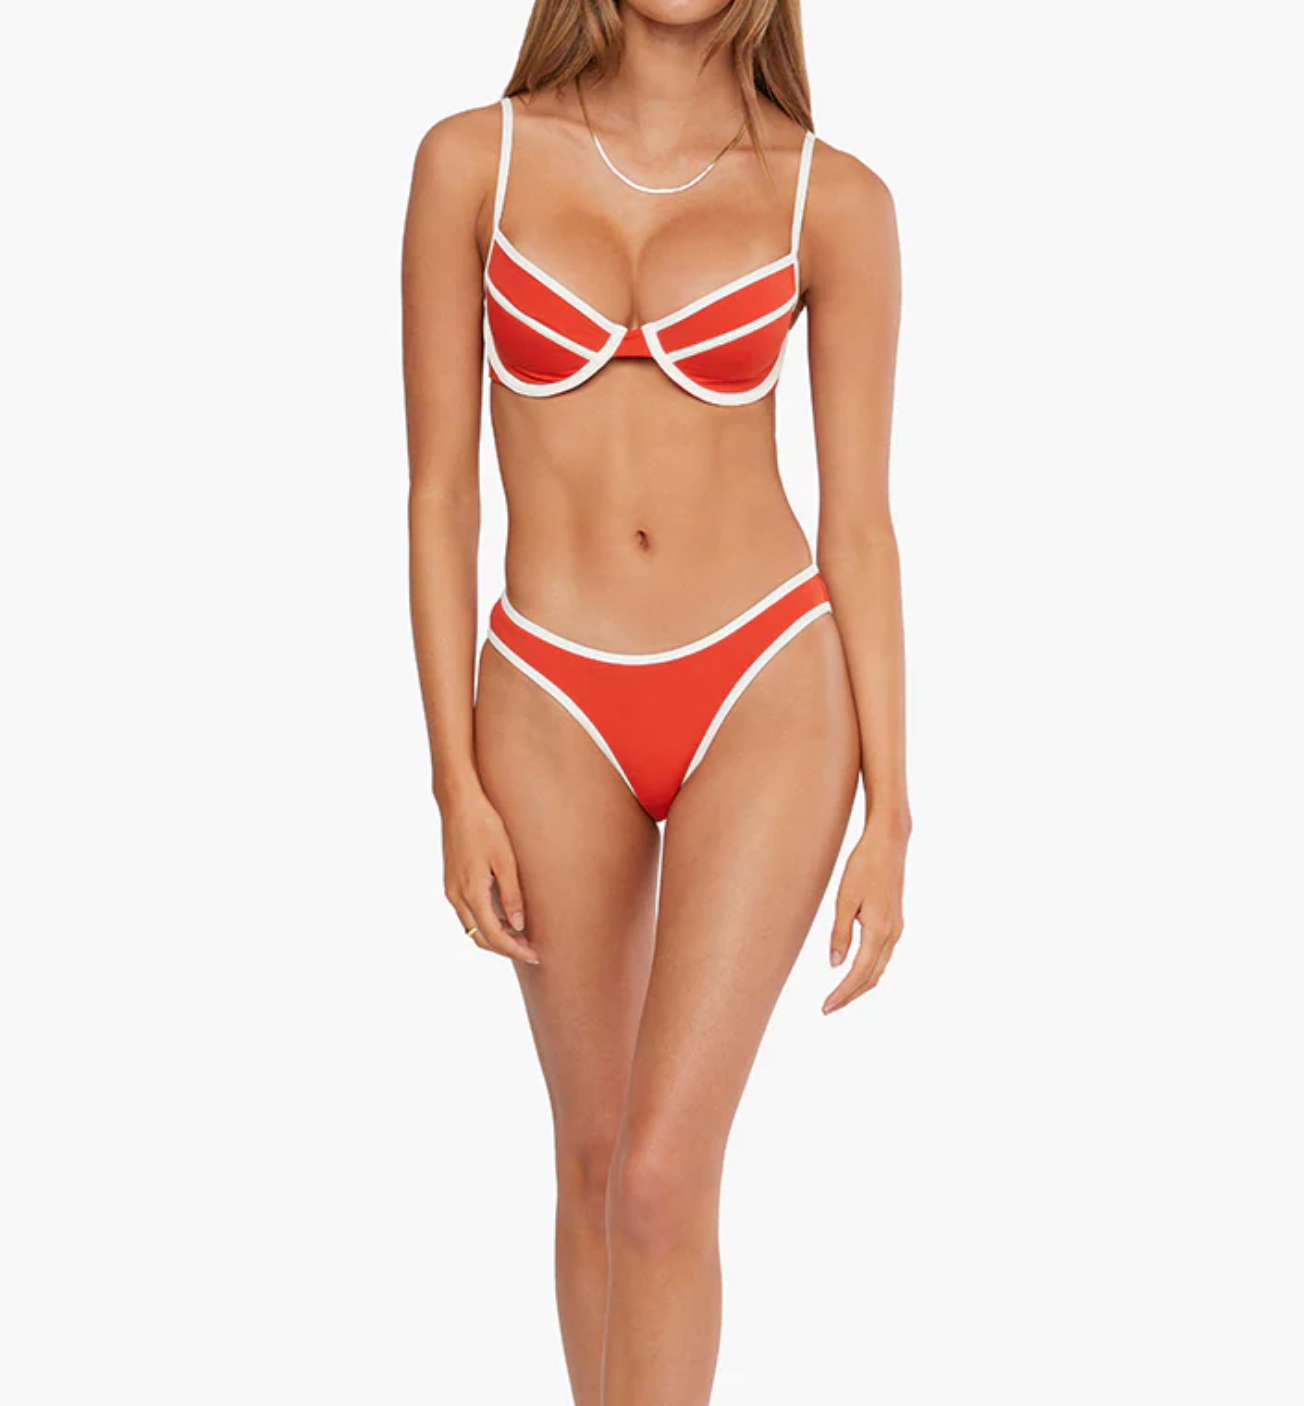 Full Coverage Underwire Bikini Top - Fiery Red/Off White - We Wore What